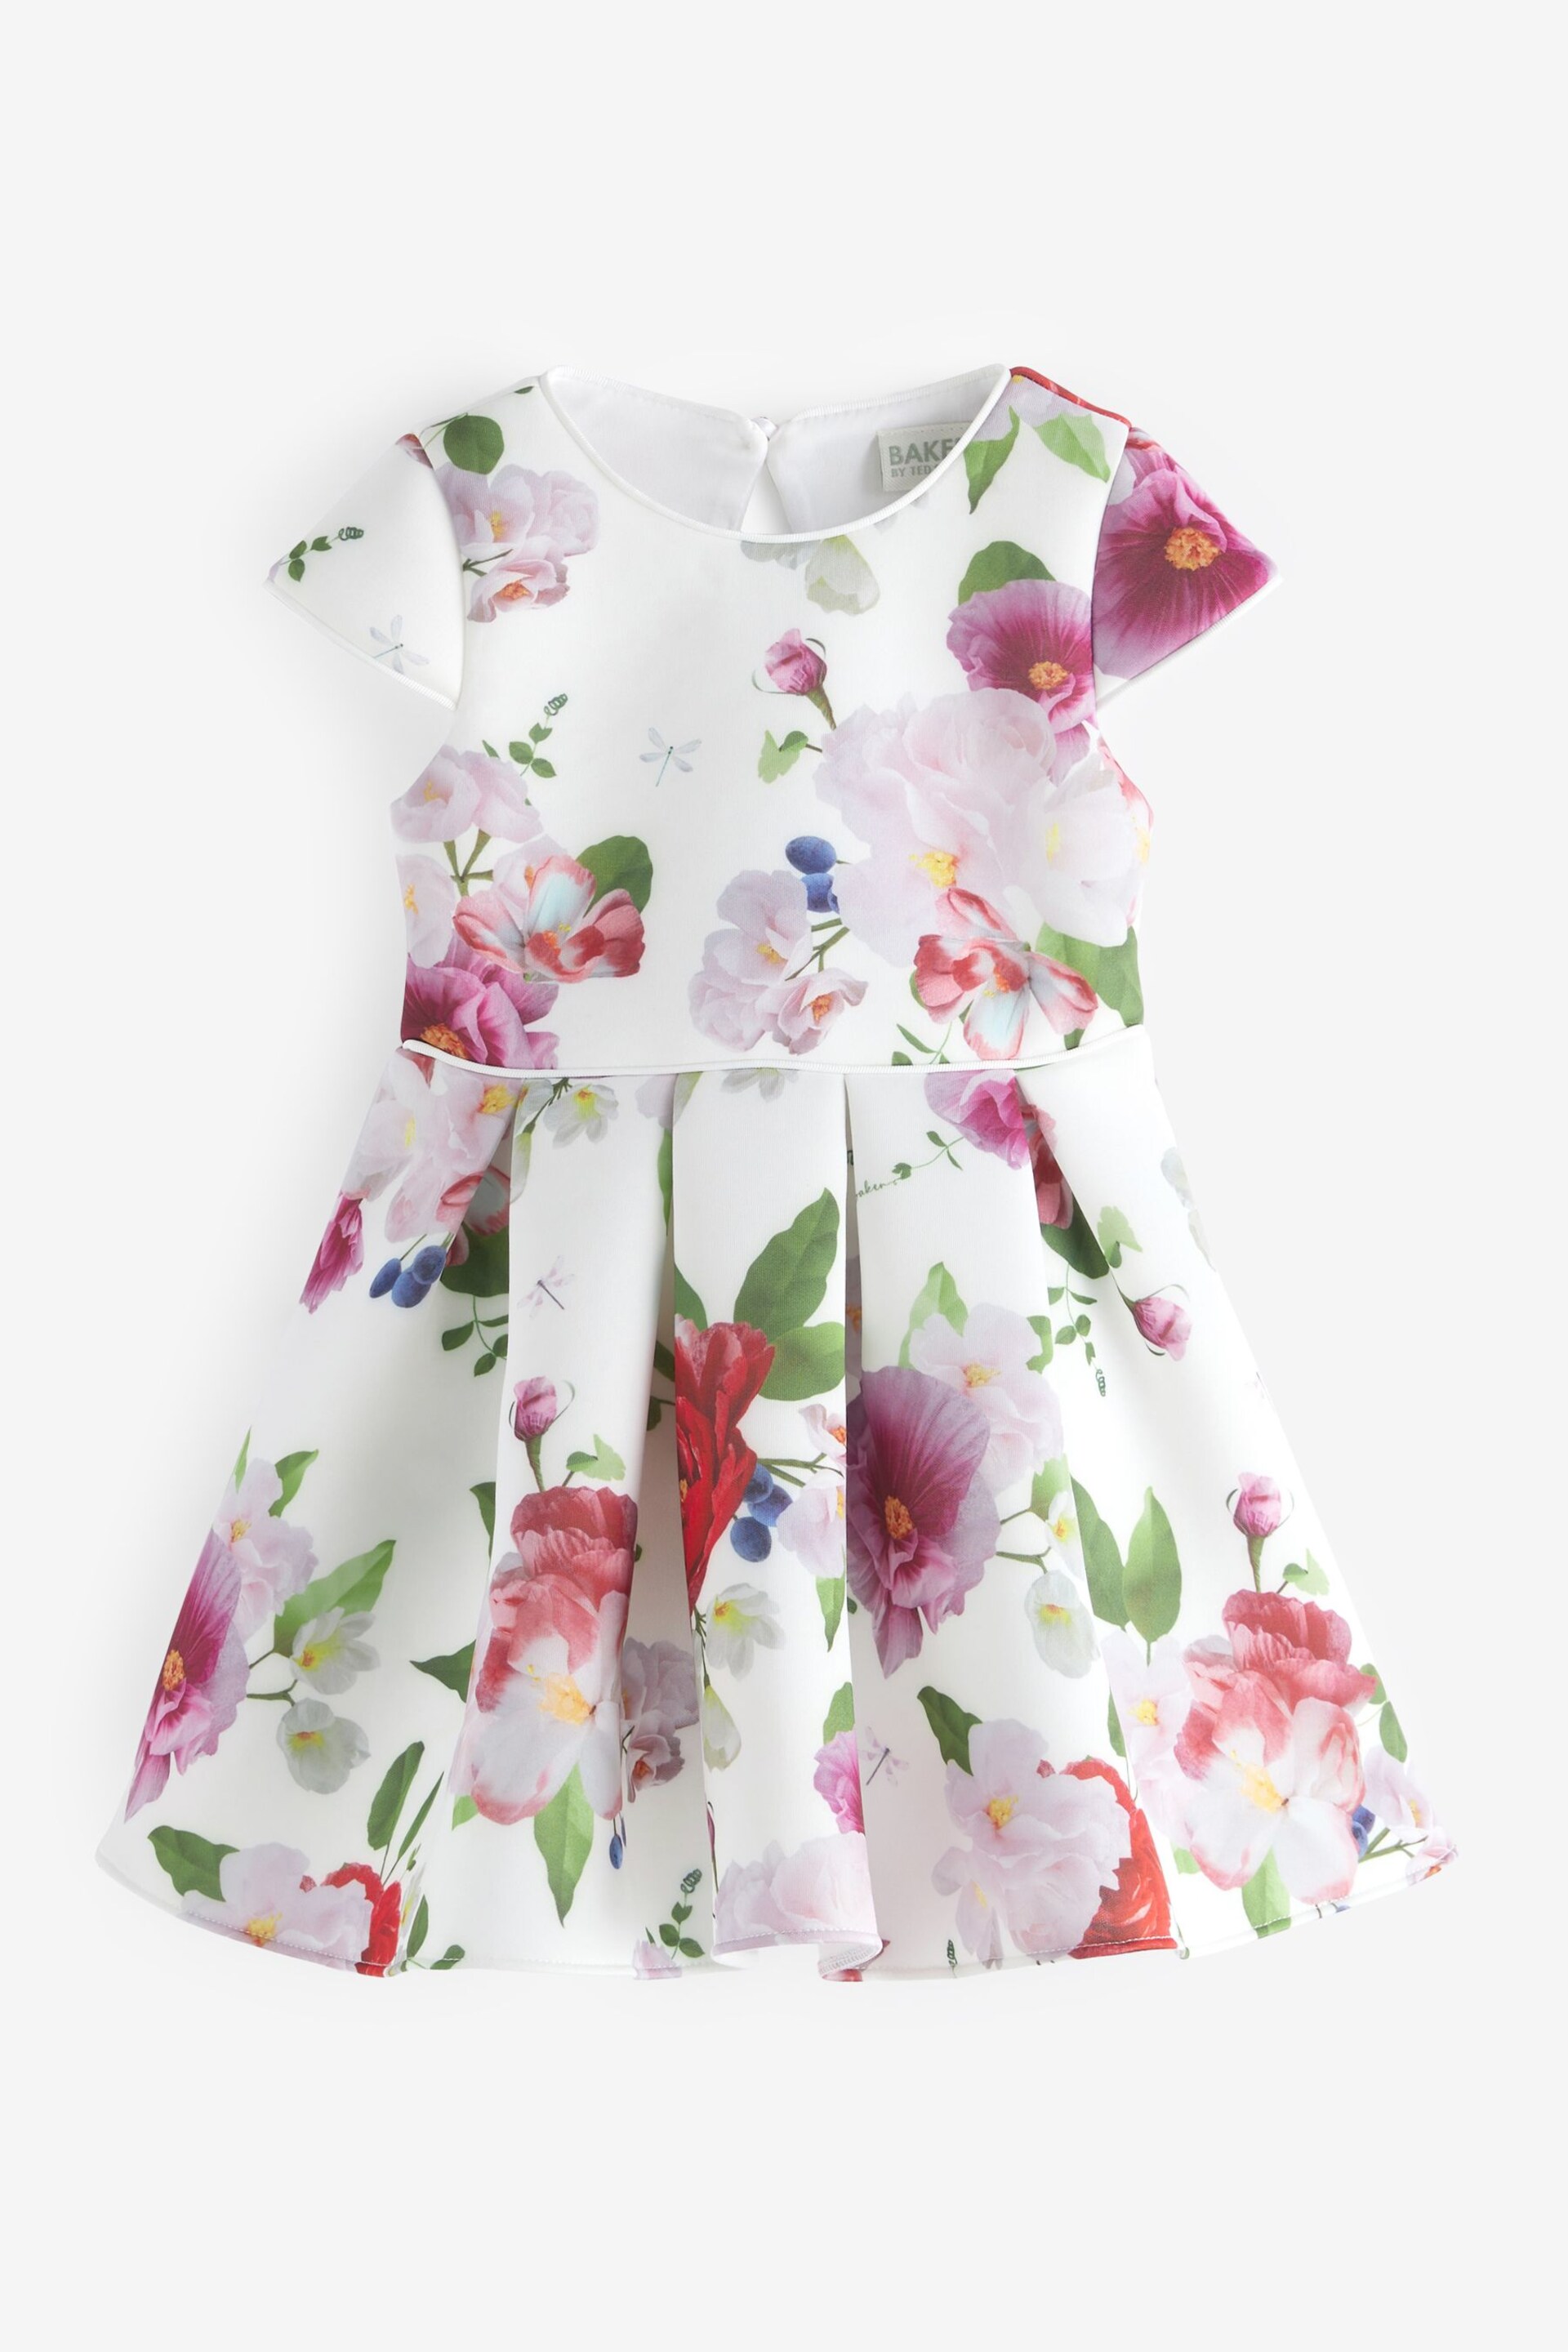 Baker by Ted Baker Floral Scuba Dress - Image 6 of 10